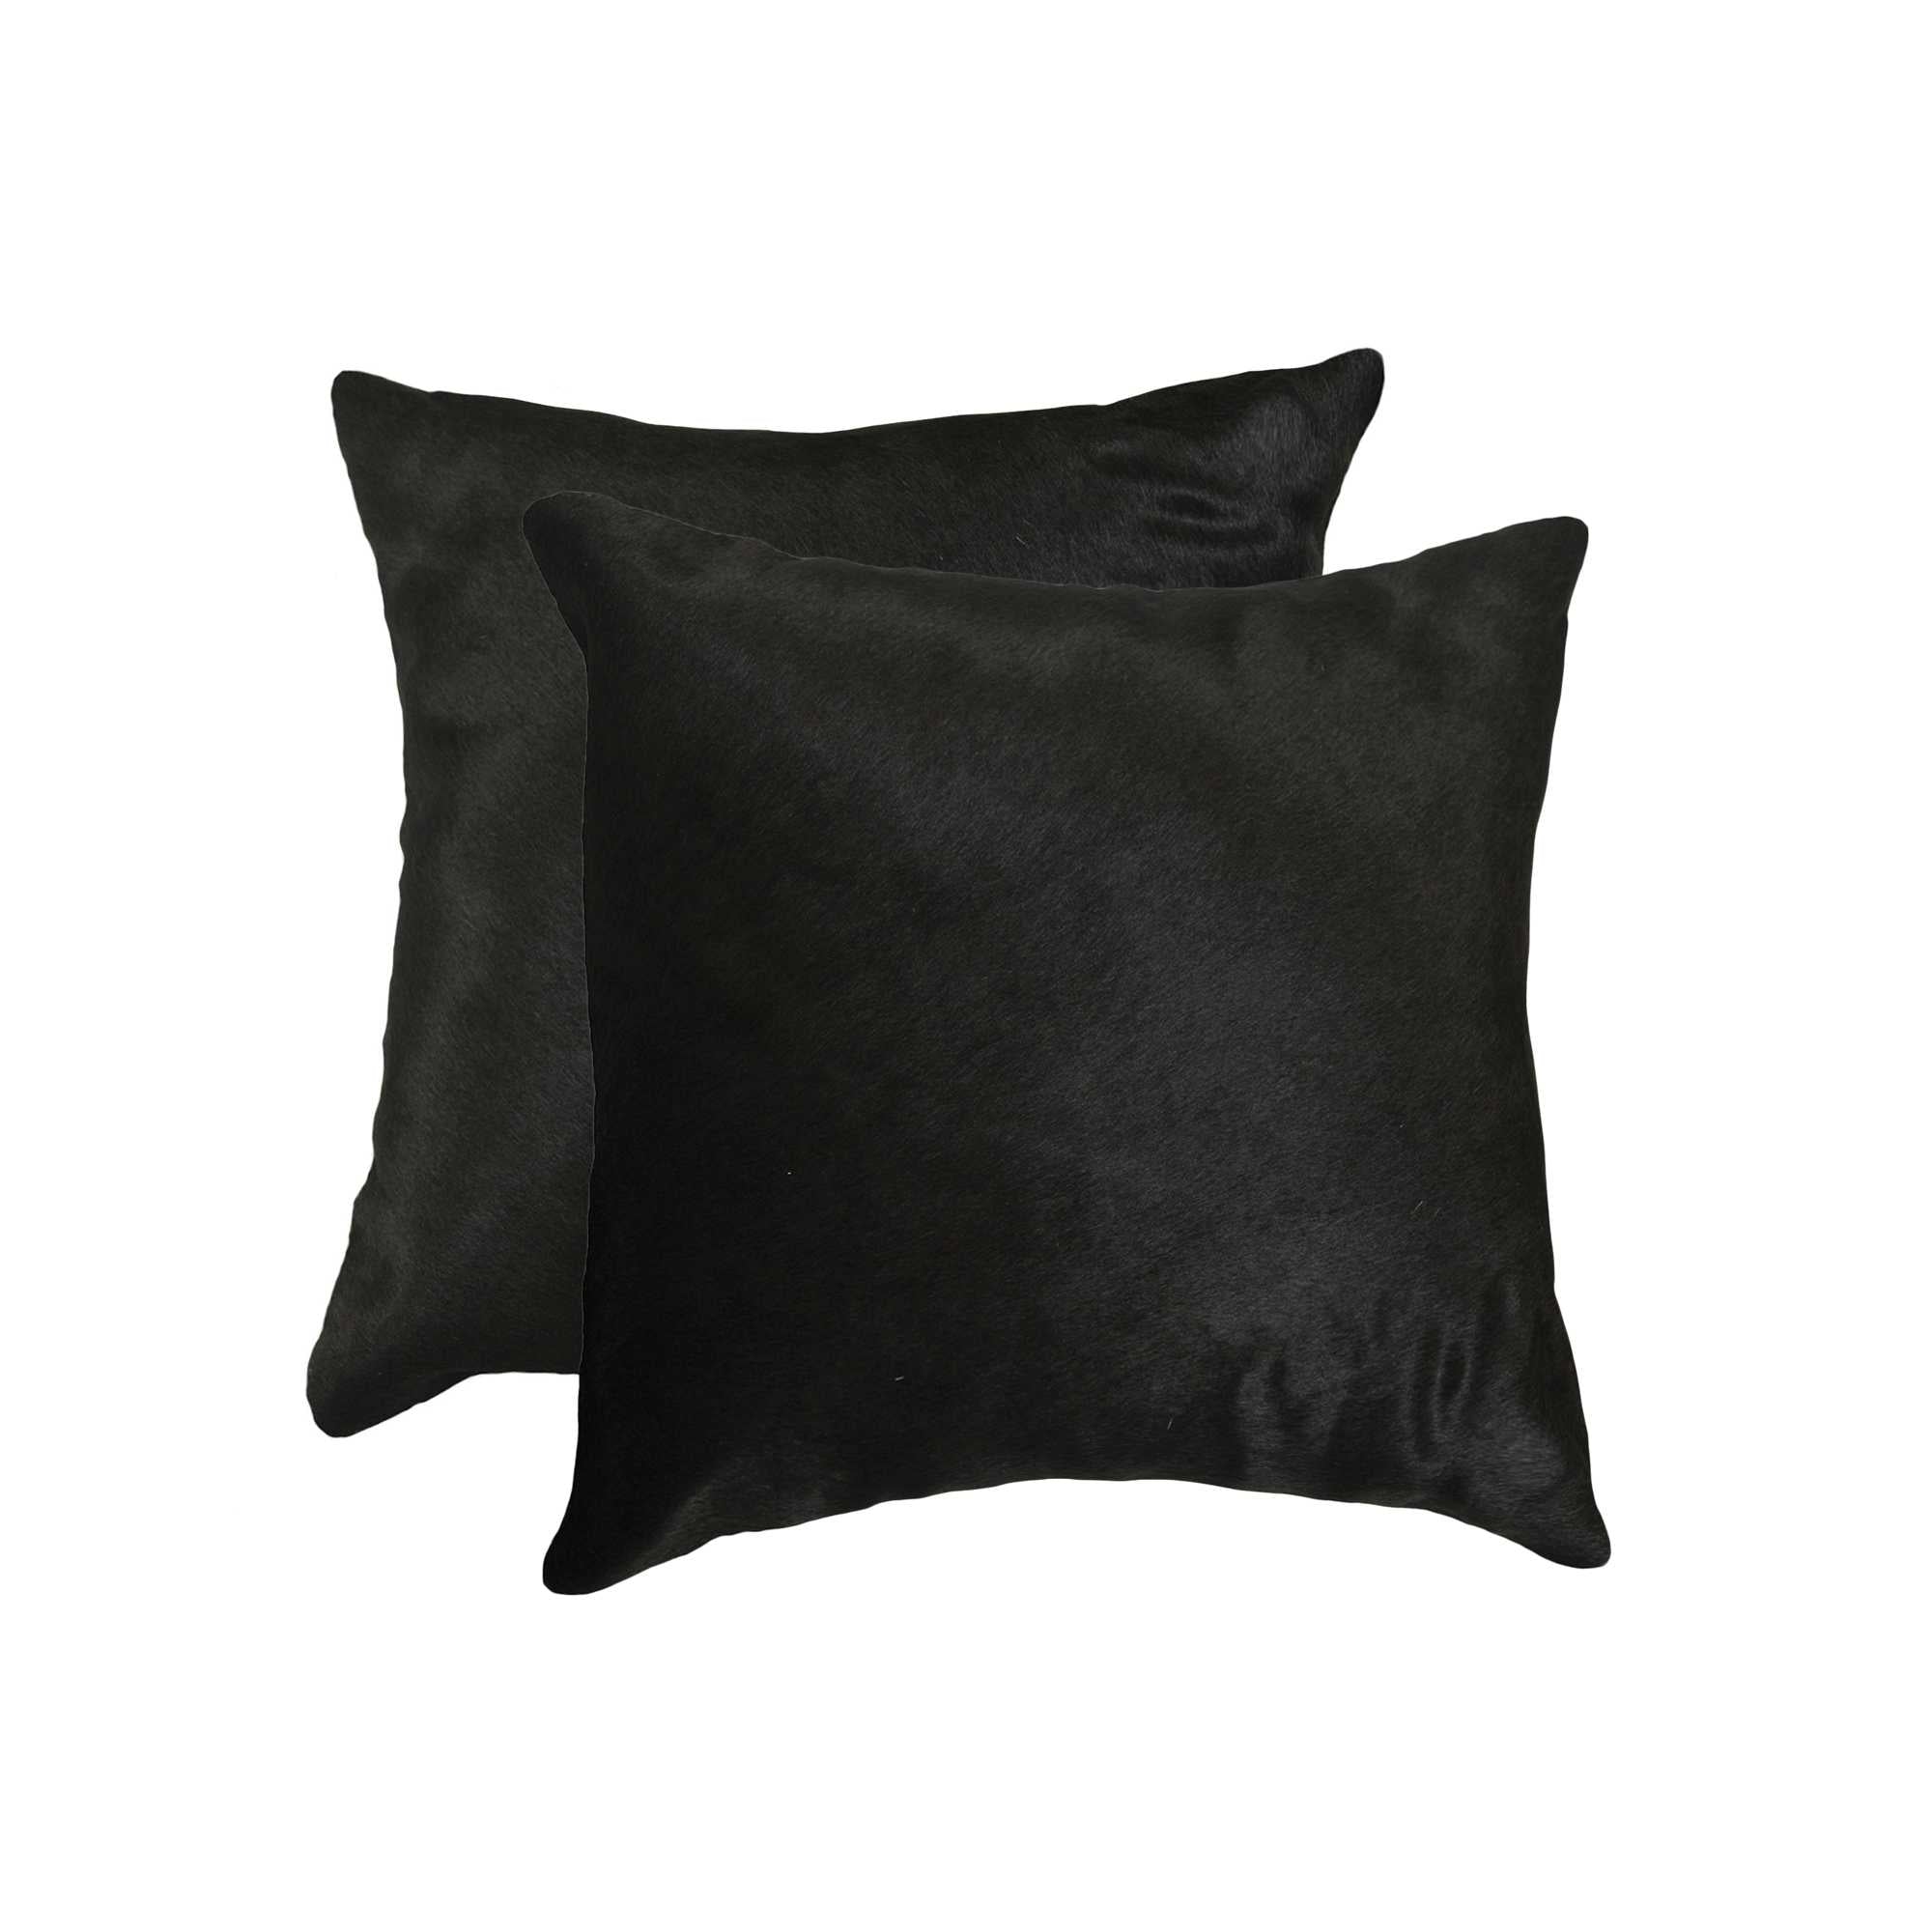 Set of Two 18" Black Cowhide Throw Pillow